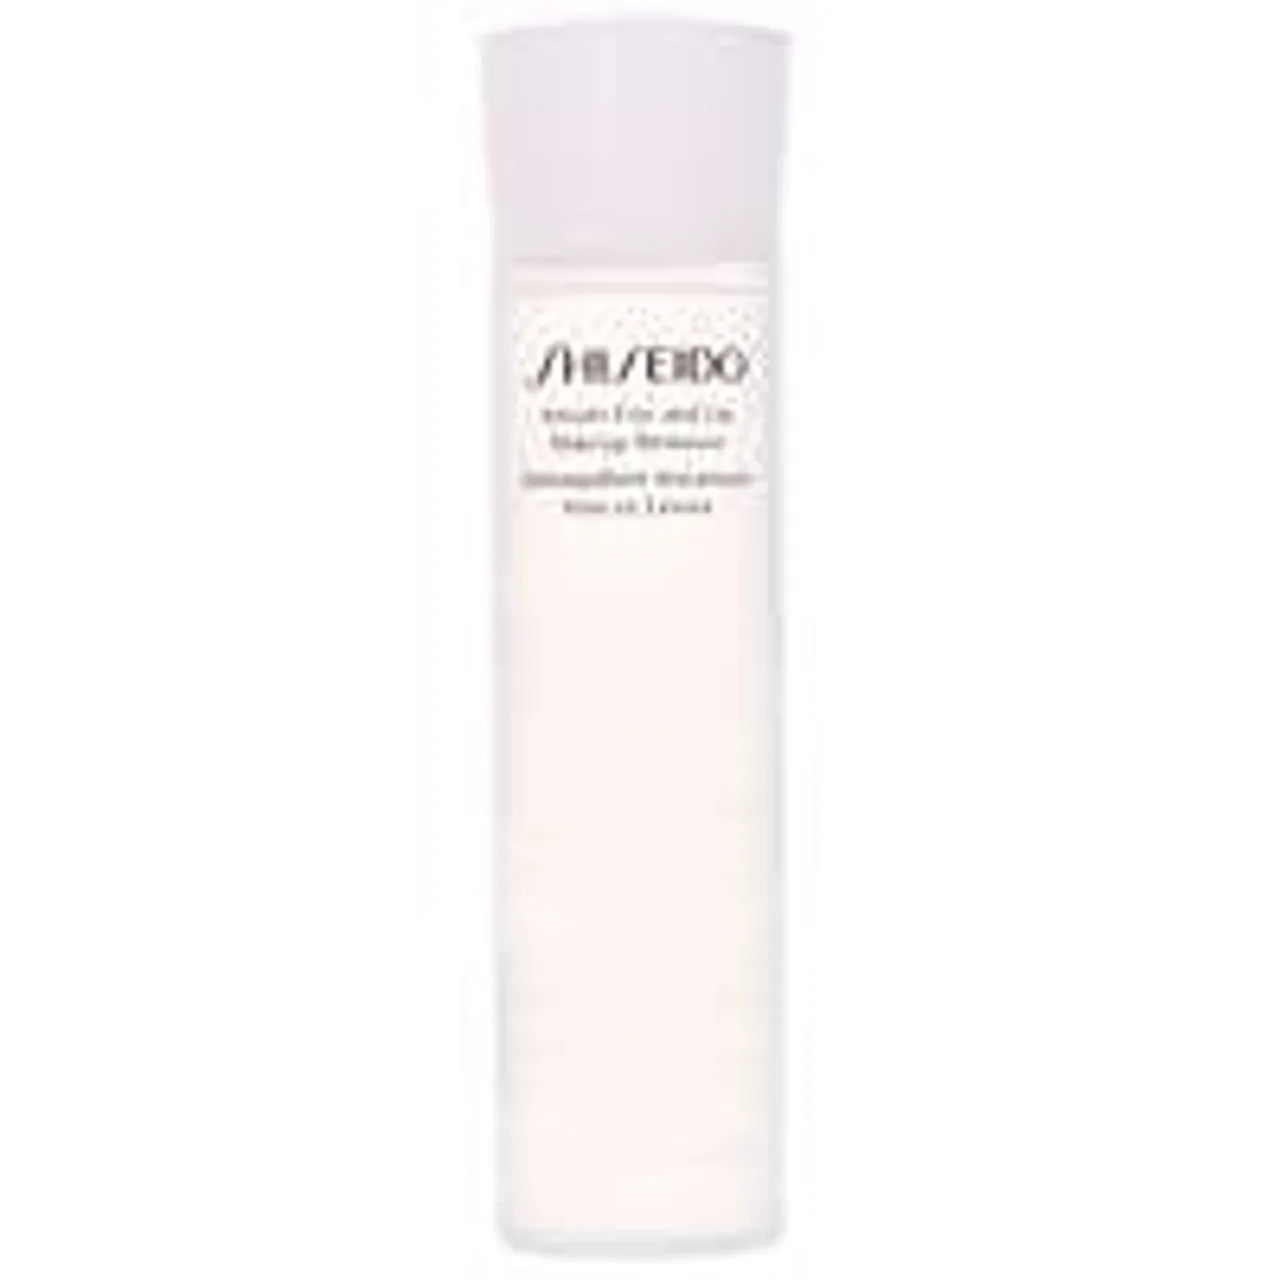 Shiseido Cleansers and Makeup Removers Essentials: Instant Eye and Lip Makeup Remover 125ml / 4.2 fl.oz.